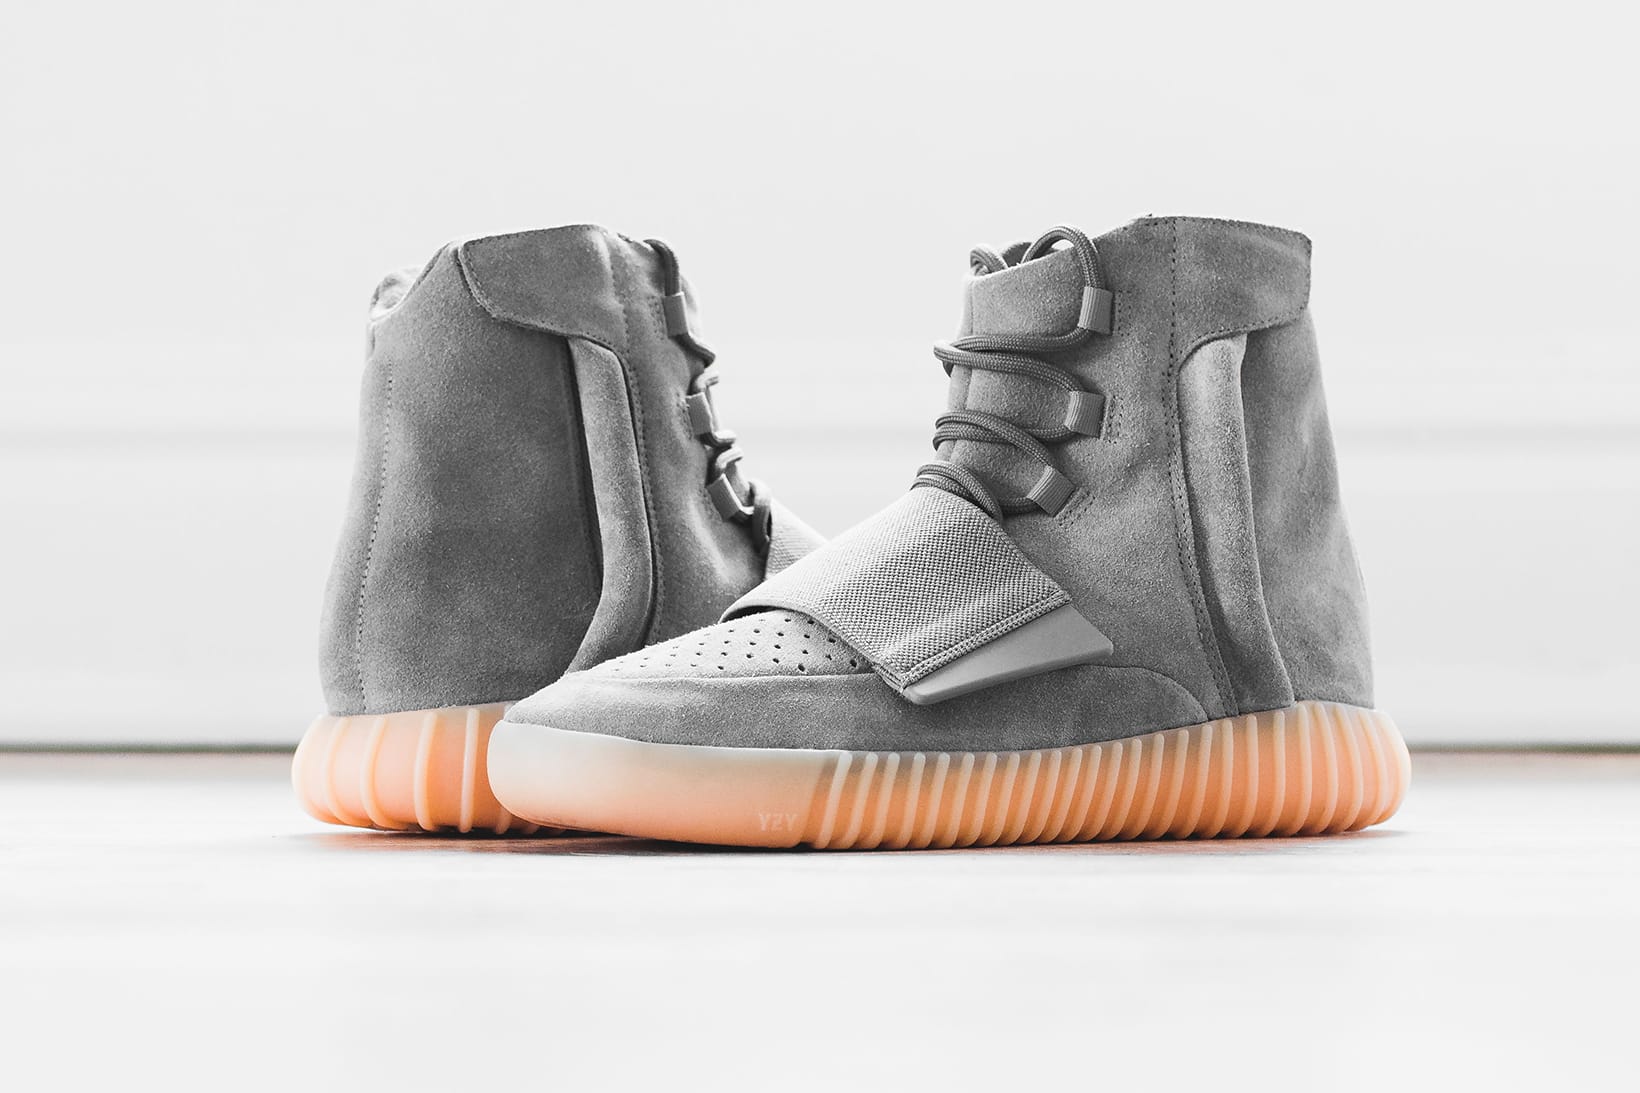 adidas yeezy 750 boost price in india 